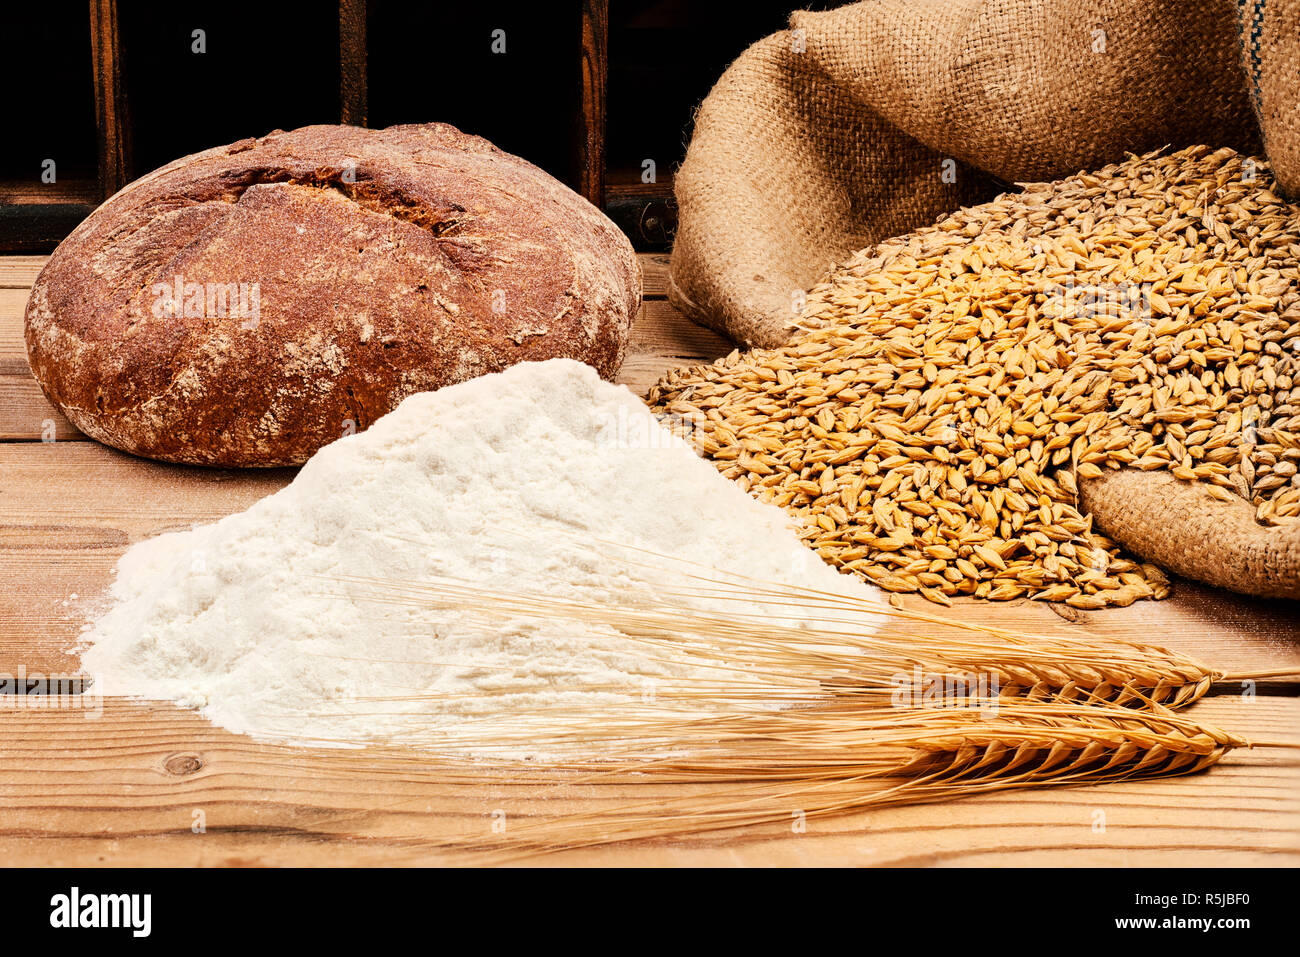 Bread with corn and wheat flour on wooden table Stock Photo